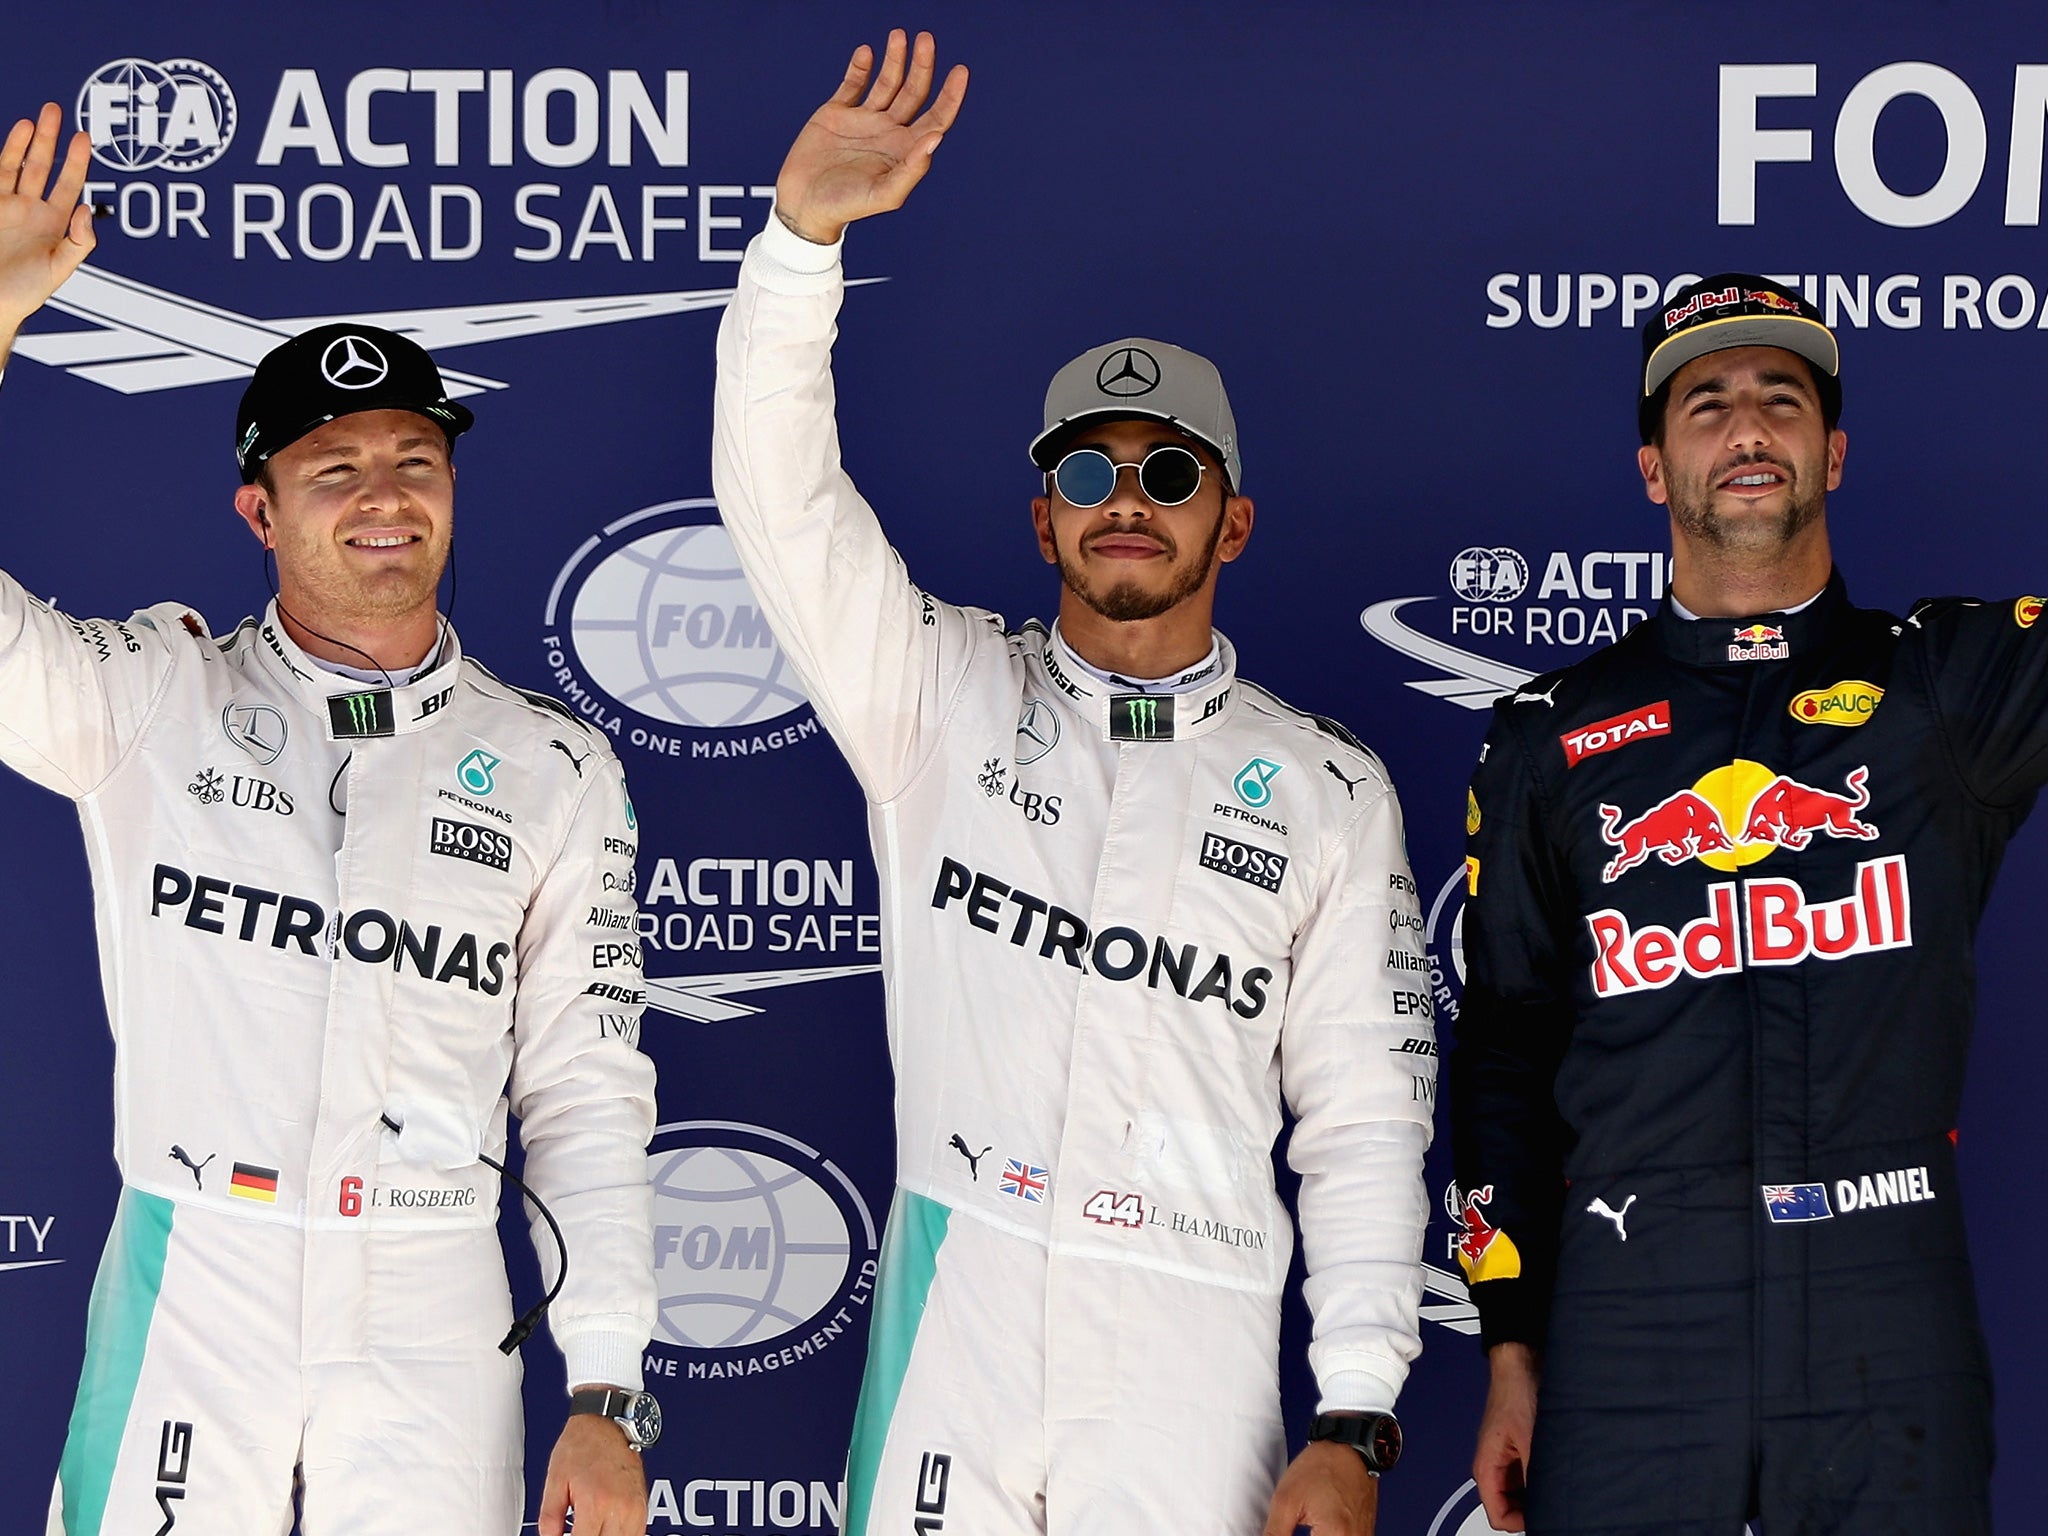 Hamilton finished 0.219 seconds clear of team-mate Rosberg